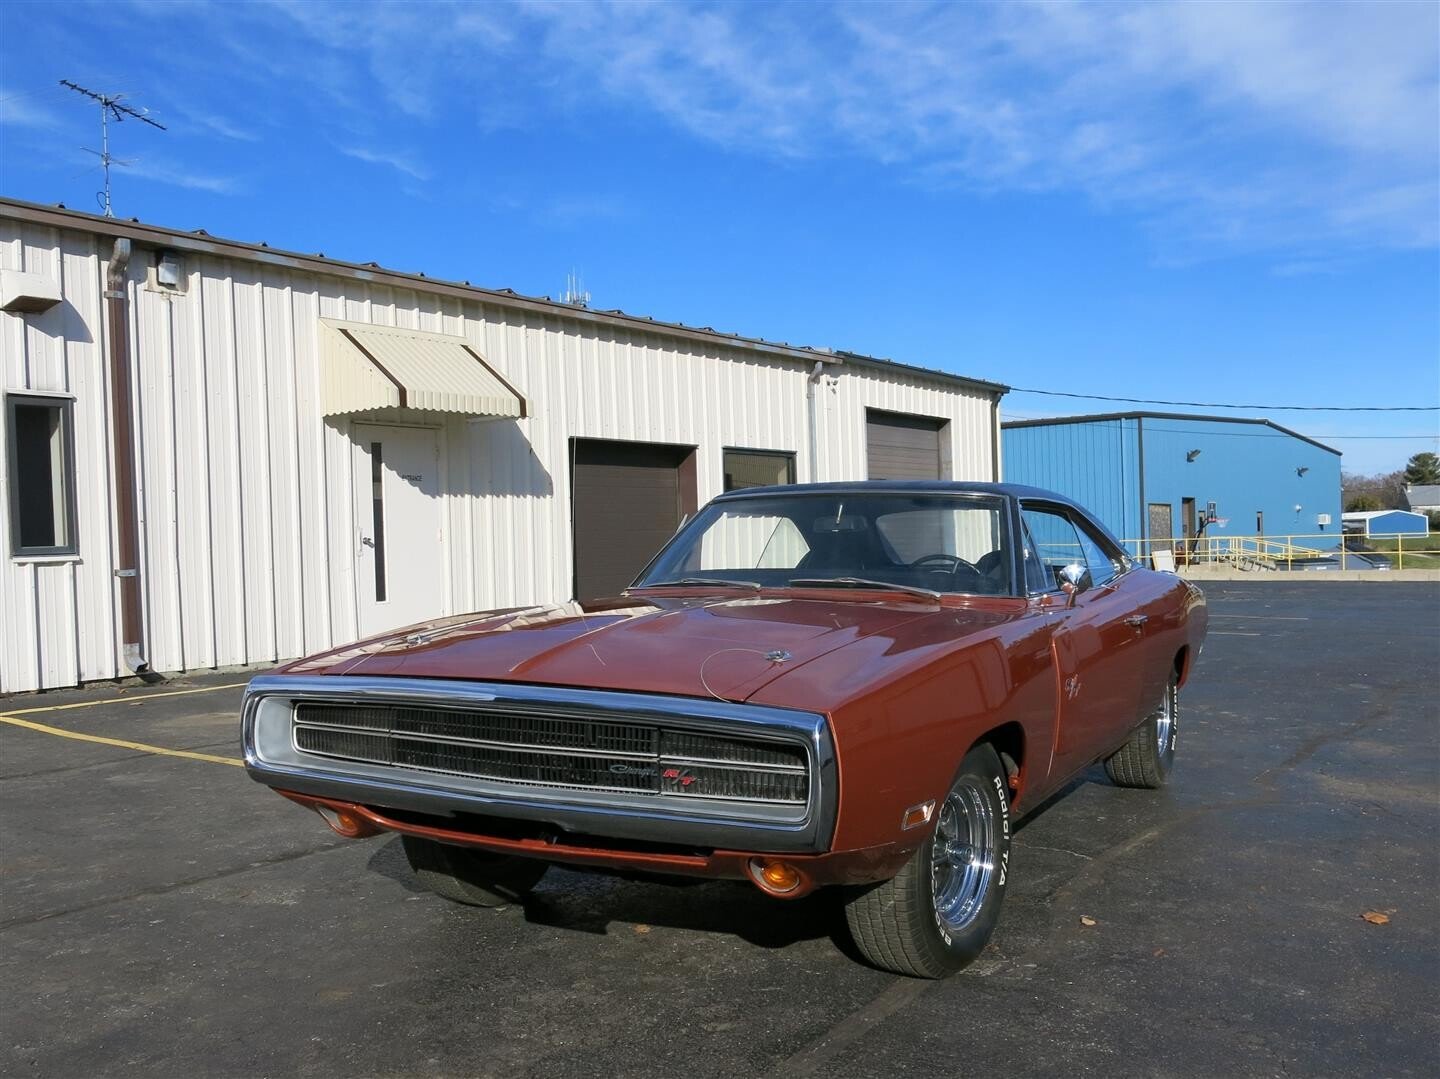 1970 Dodge Charger For Sale Near Manitowoc Wisconsin 54220